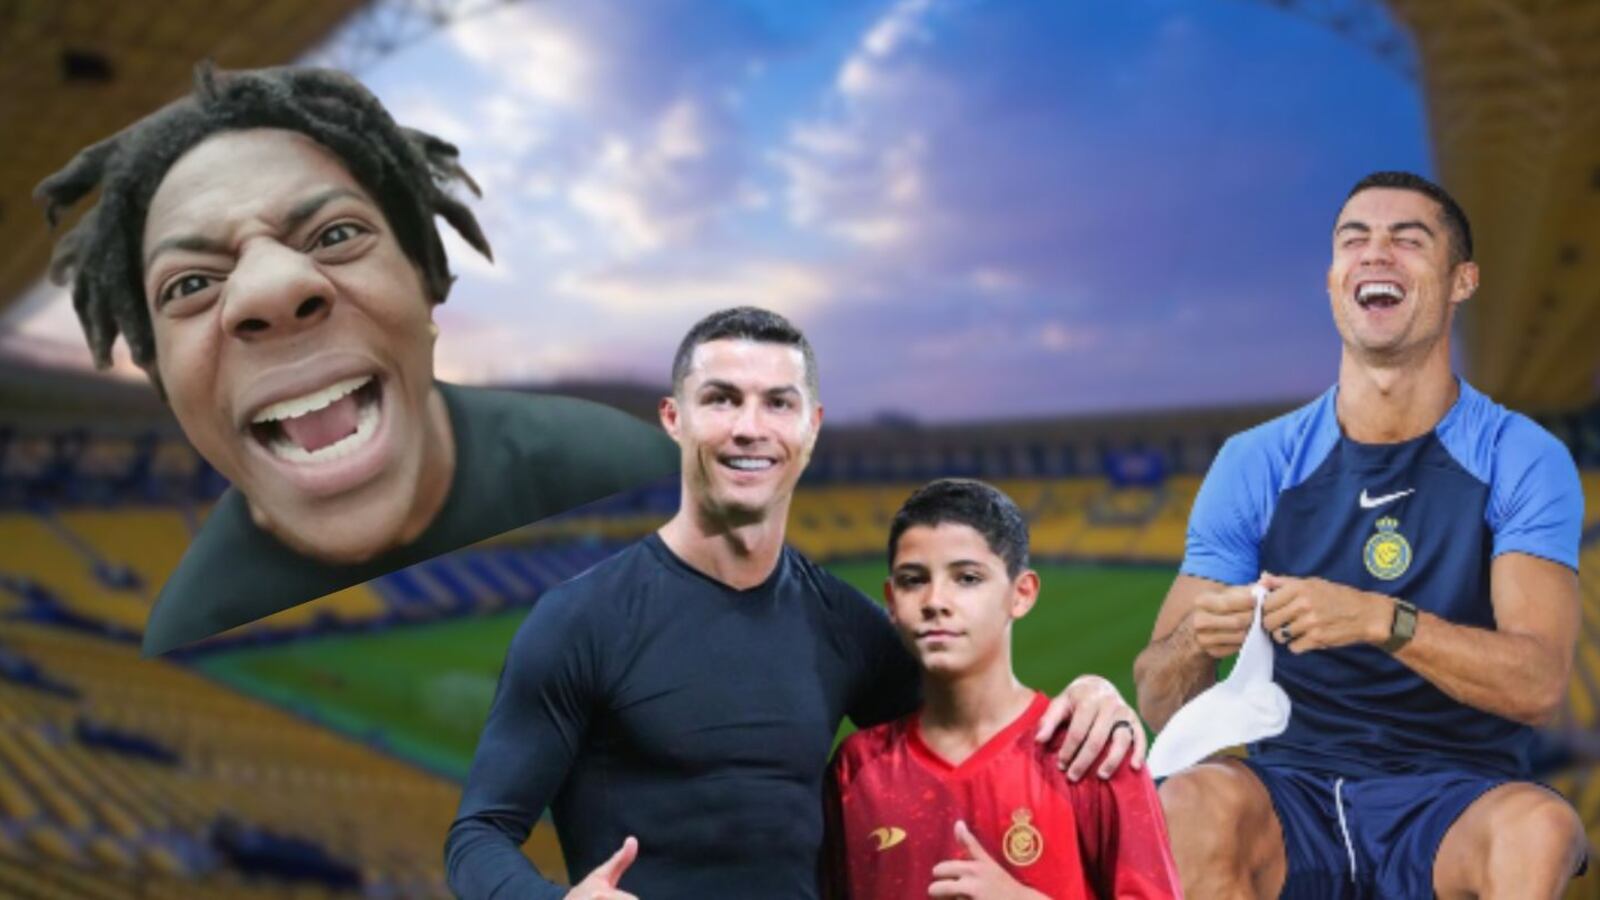 Cris Jr.'s humiliation of his dad's biggest fan that everyone is talking about